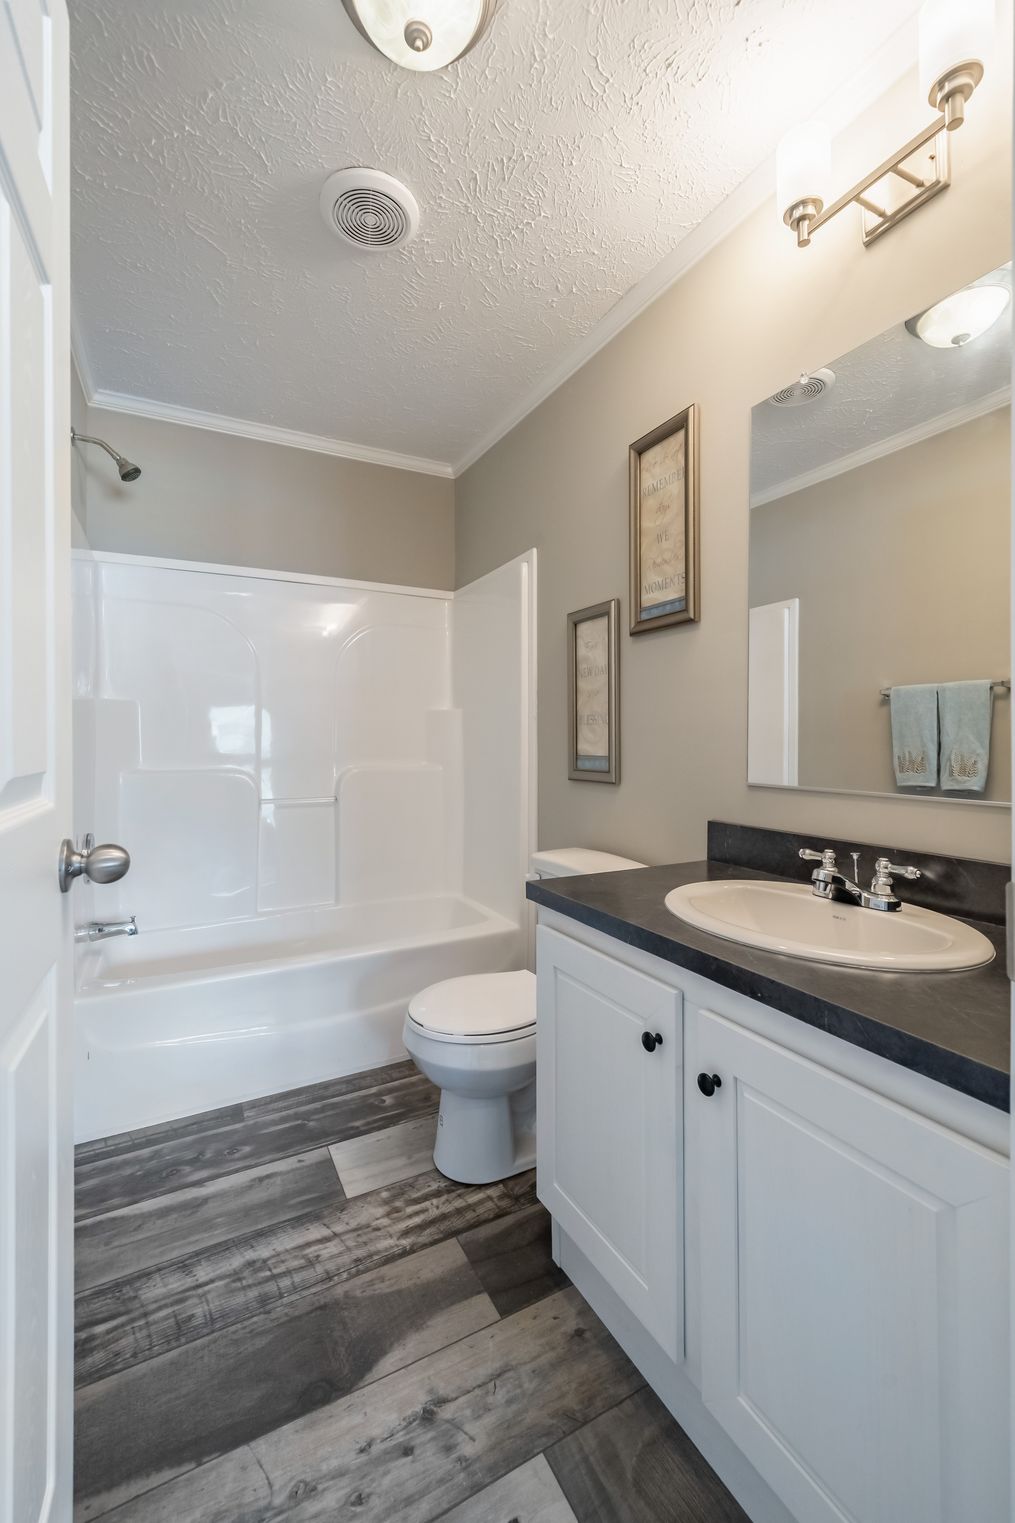 The 4602 ROCKETEER 2 7028 Guest Bathroom. This Manufactured Mobile Home features 4 bedrooms and 2 baths.